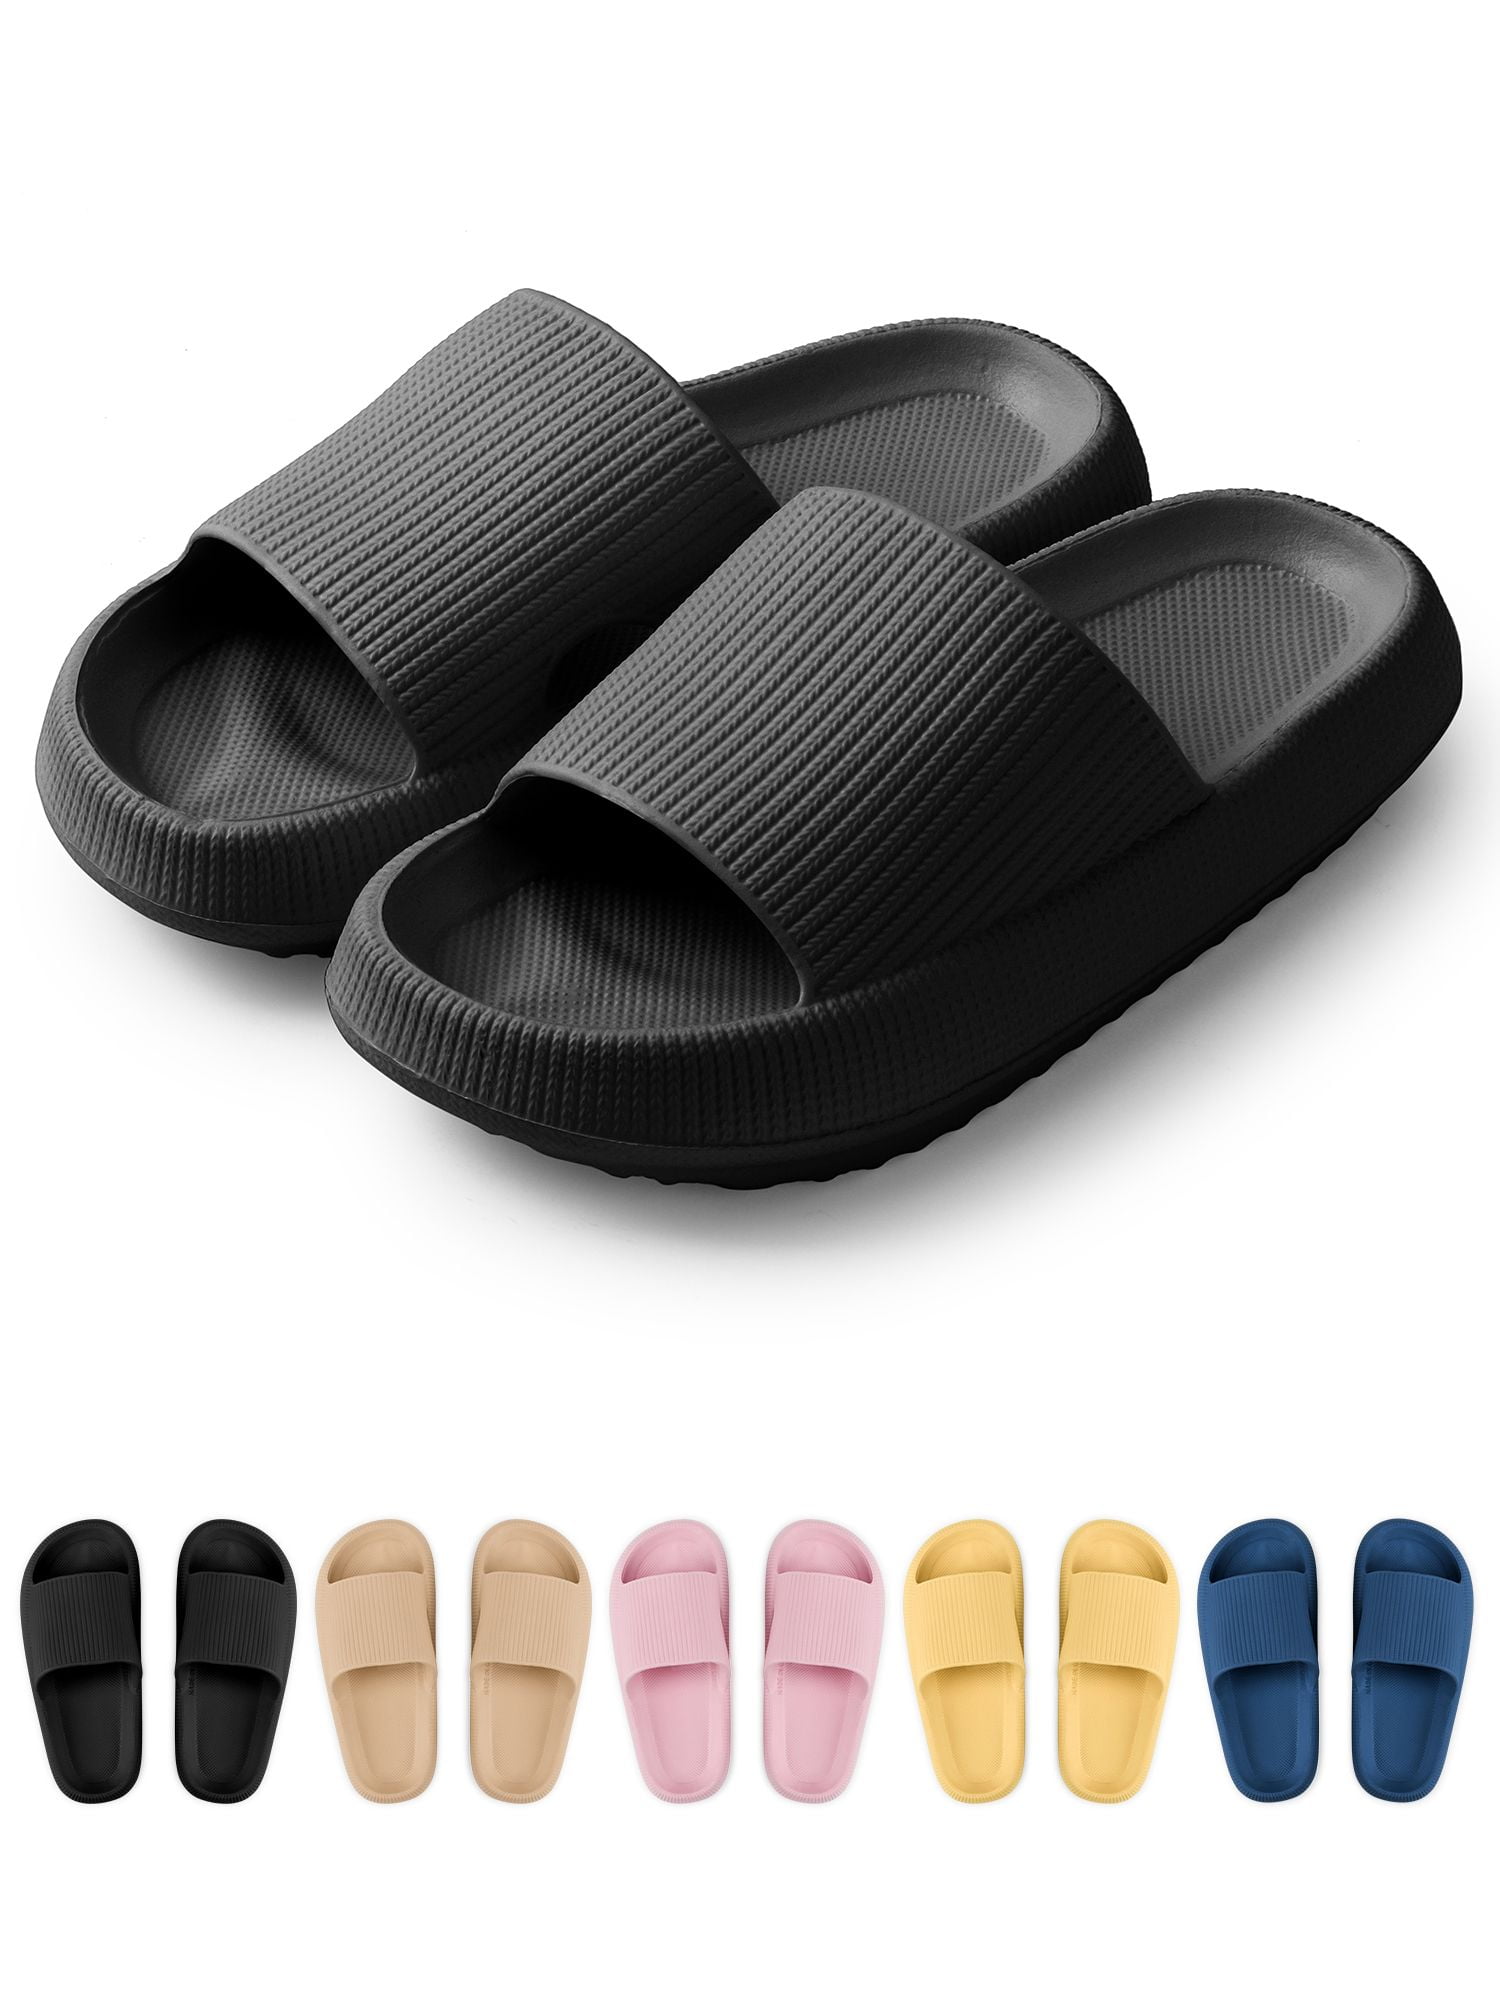 Gustave Clouds Anti-Slip Slippers for Women and Men, Shower Bathroom ...